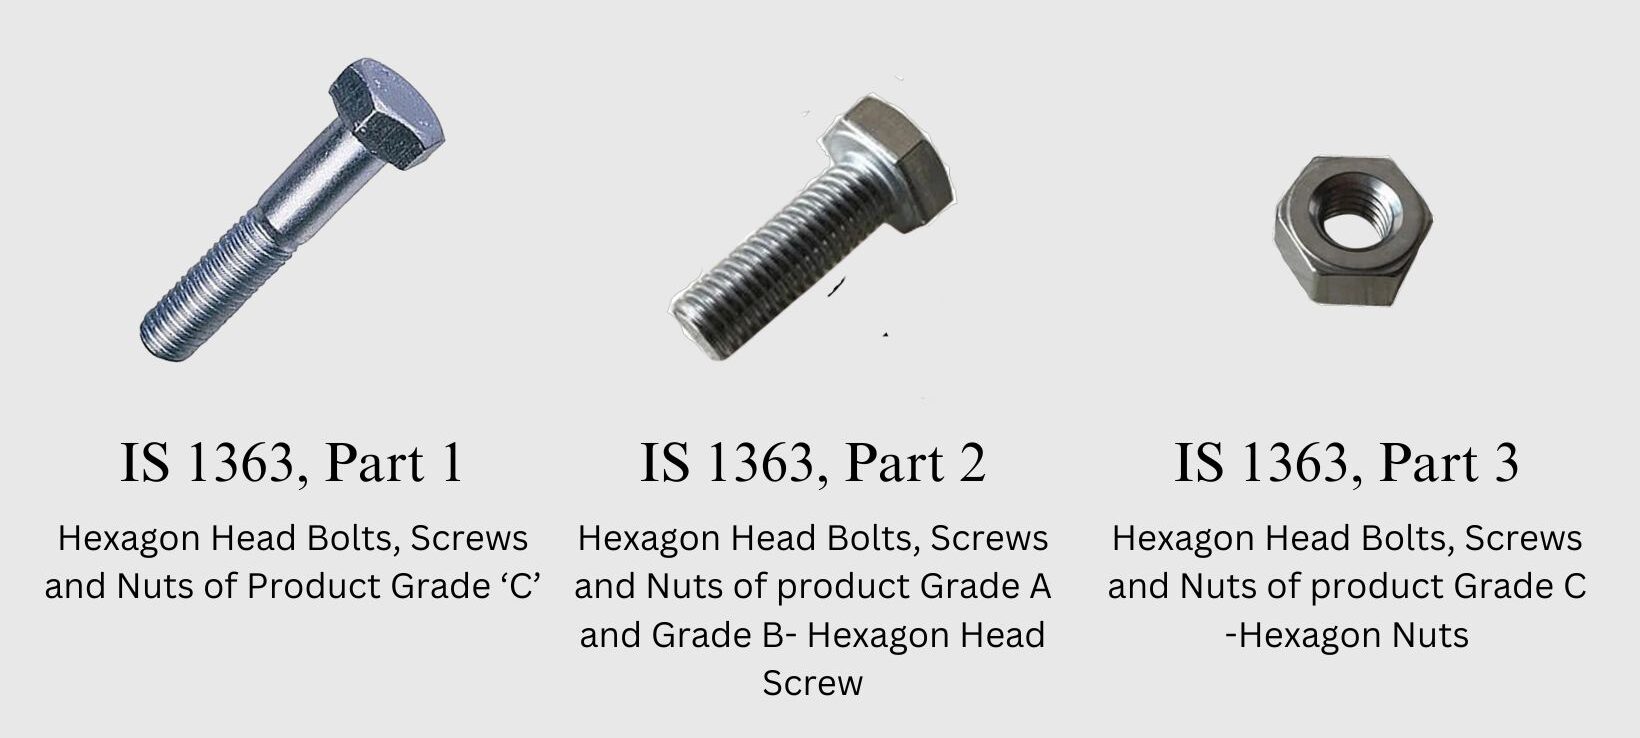 BIS Certification for Hexagonal Bolts, Nuts and Screws as per IS 1363 (Part  1, 2 and 3) and IS 1364 (Part 1 and 2) - OMEGA